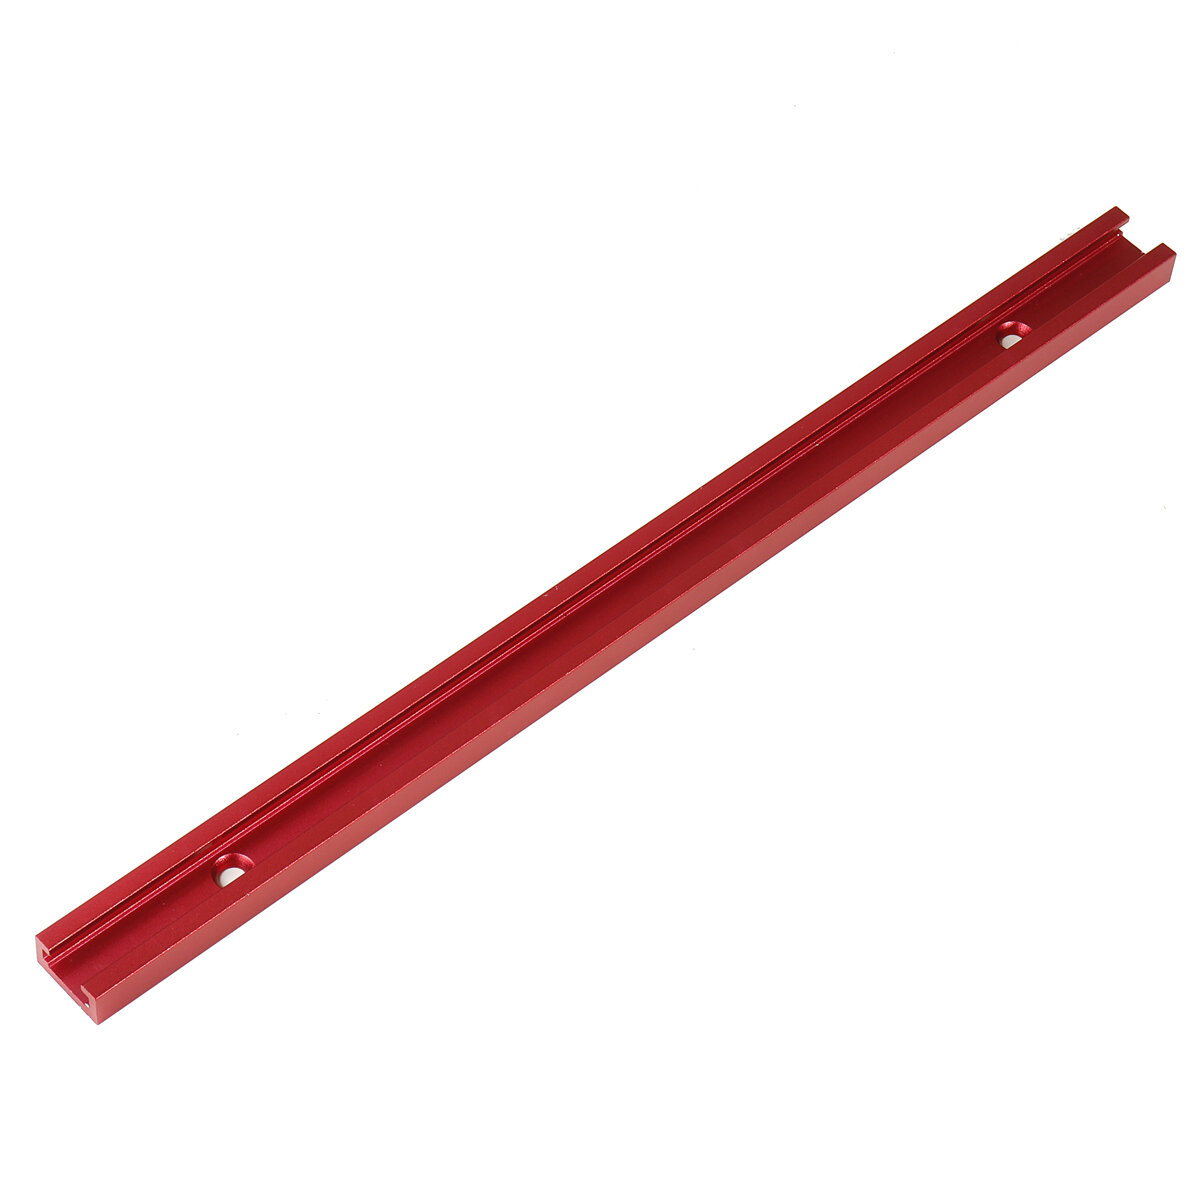 

Red Aluminum Alloy 300-1220mm T-track T-slot Miter Track Jig T Screw Fixture Slot 19x9.5mm For Table Saw Router Table Wo